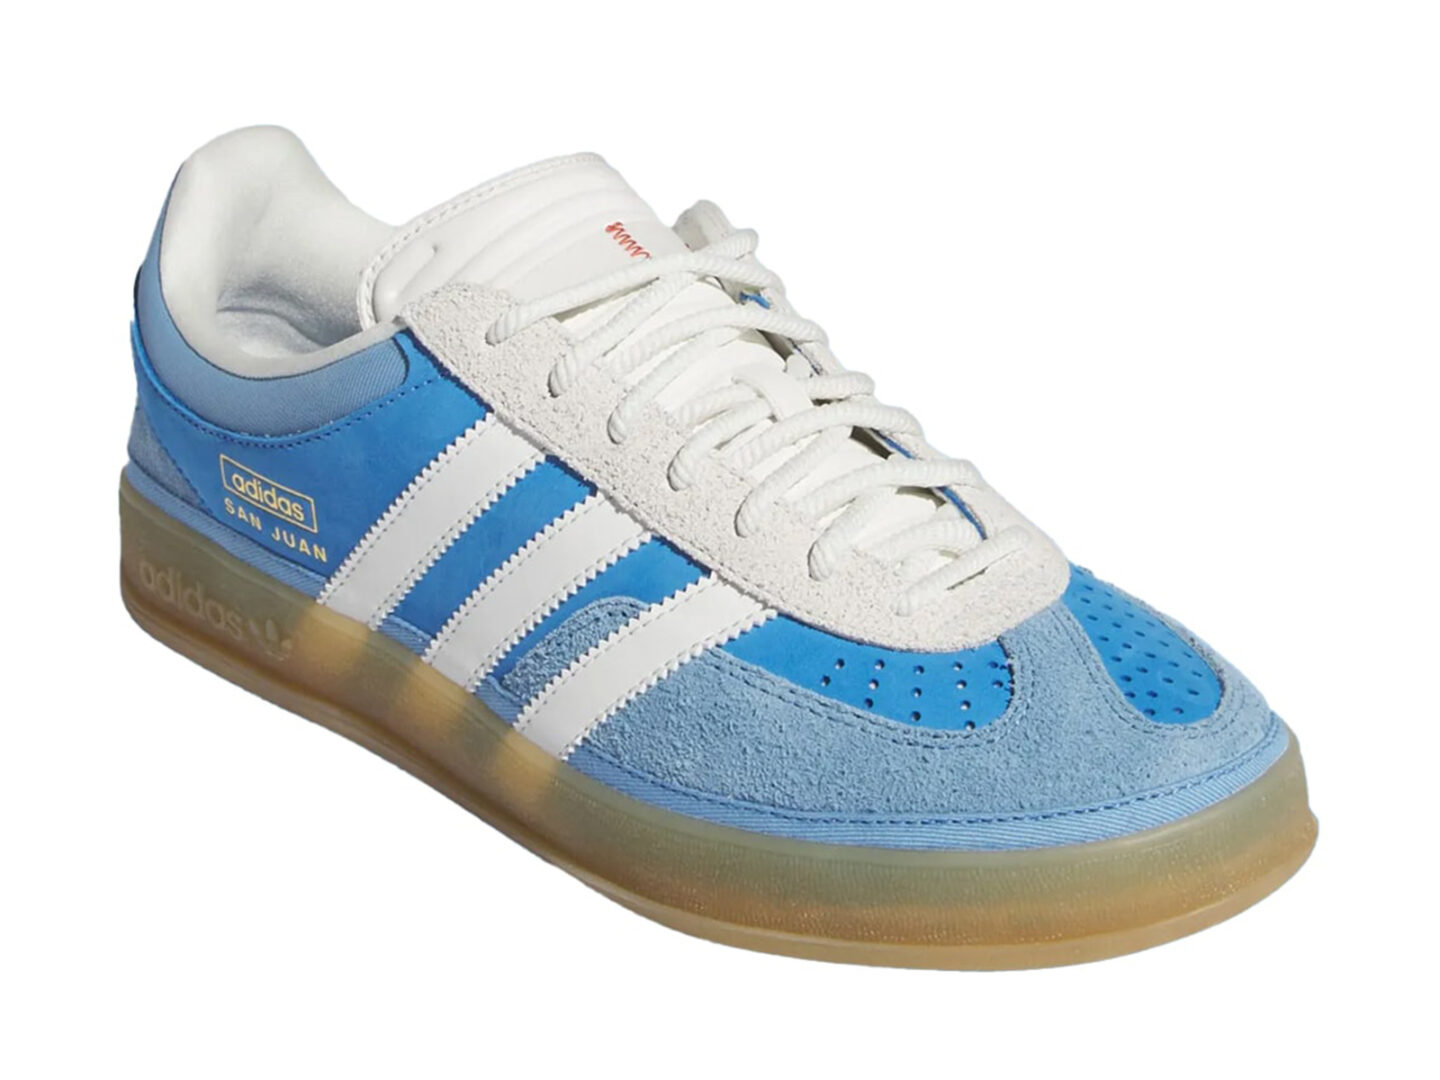 Bad Bunny pays tribute to his roots with the adidas Gazelle Indoor ‘San Juan’